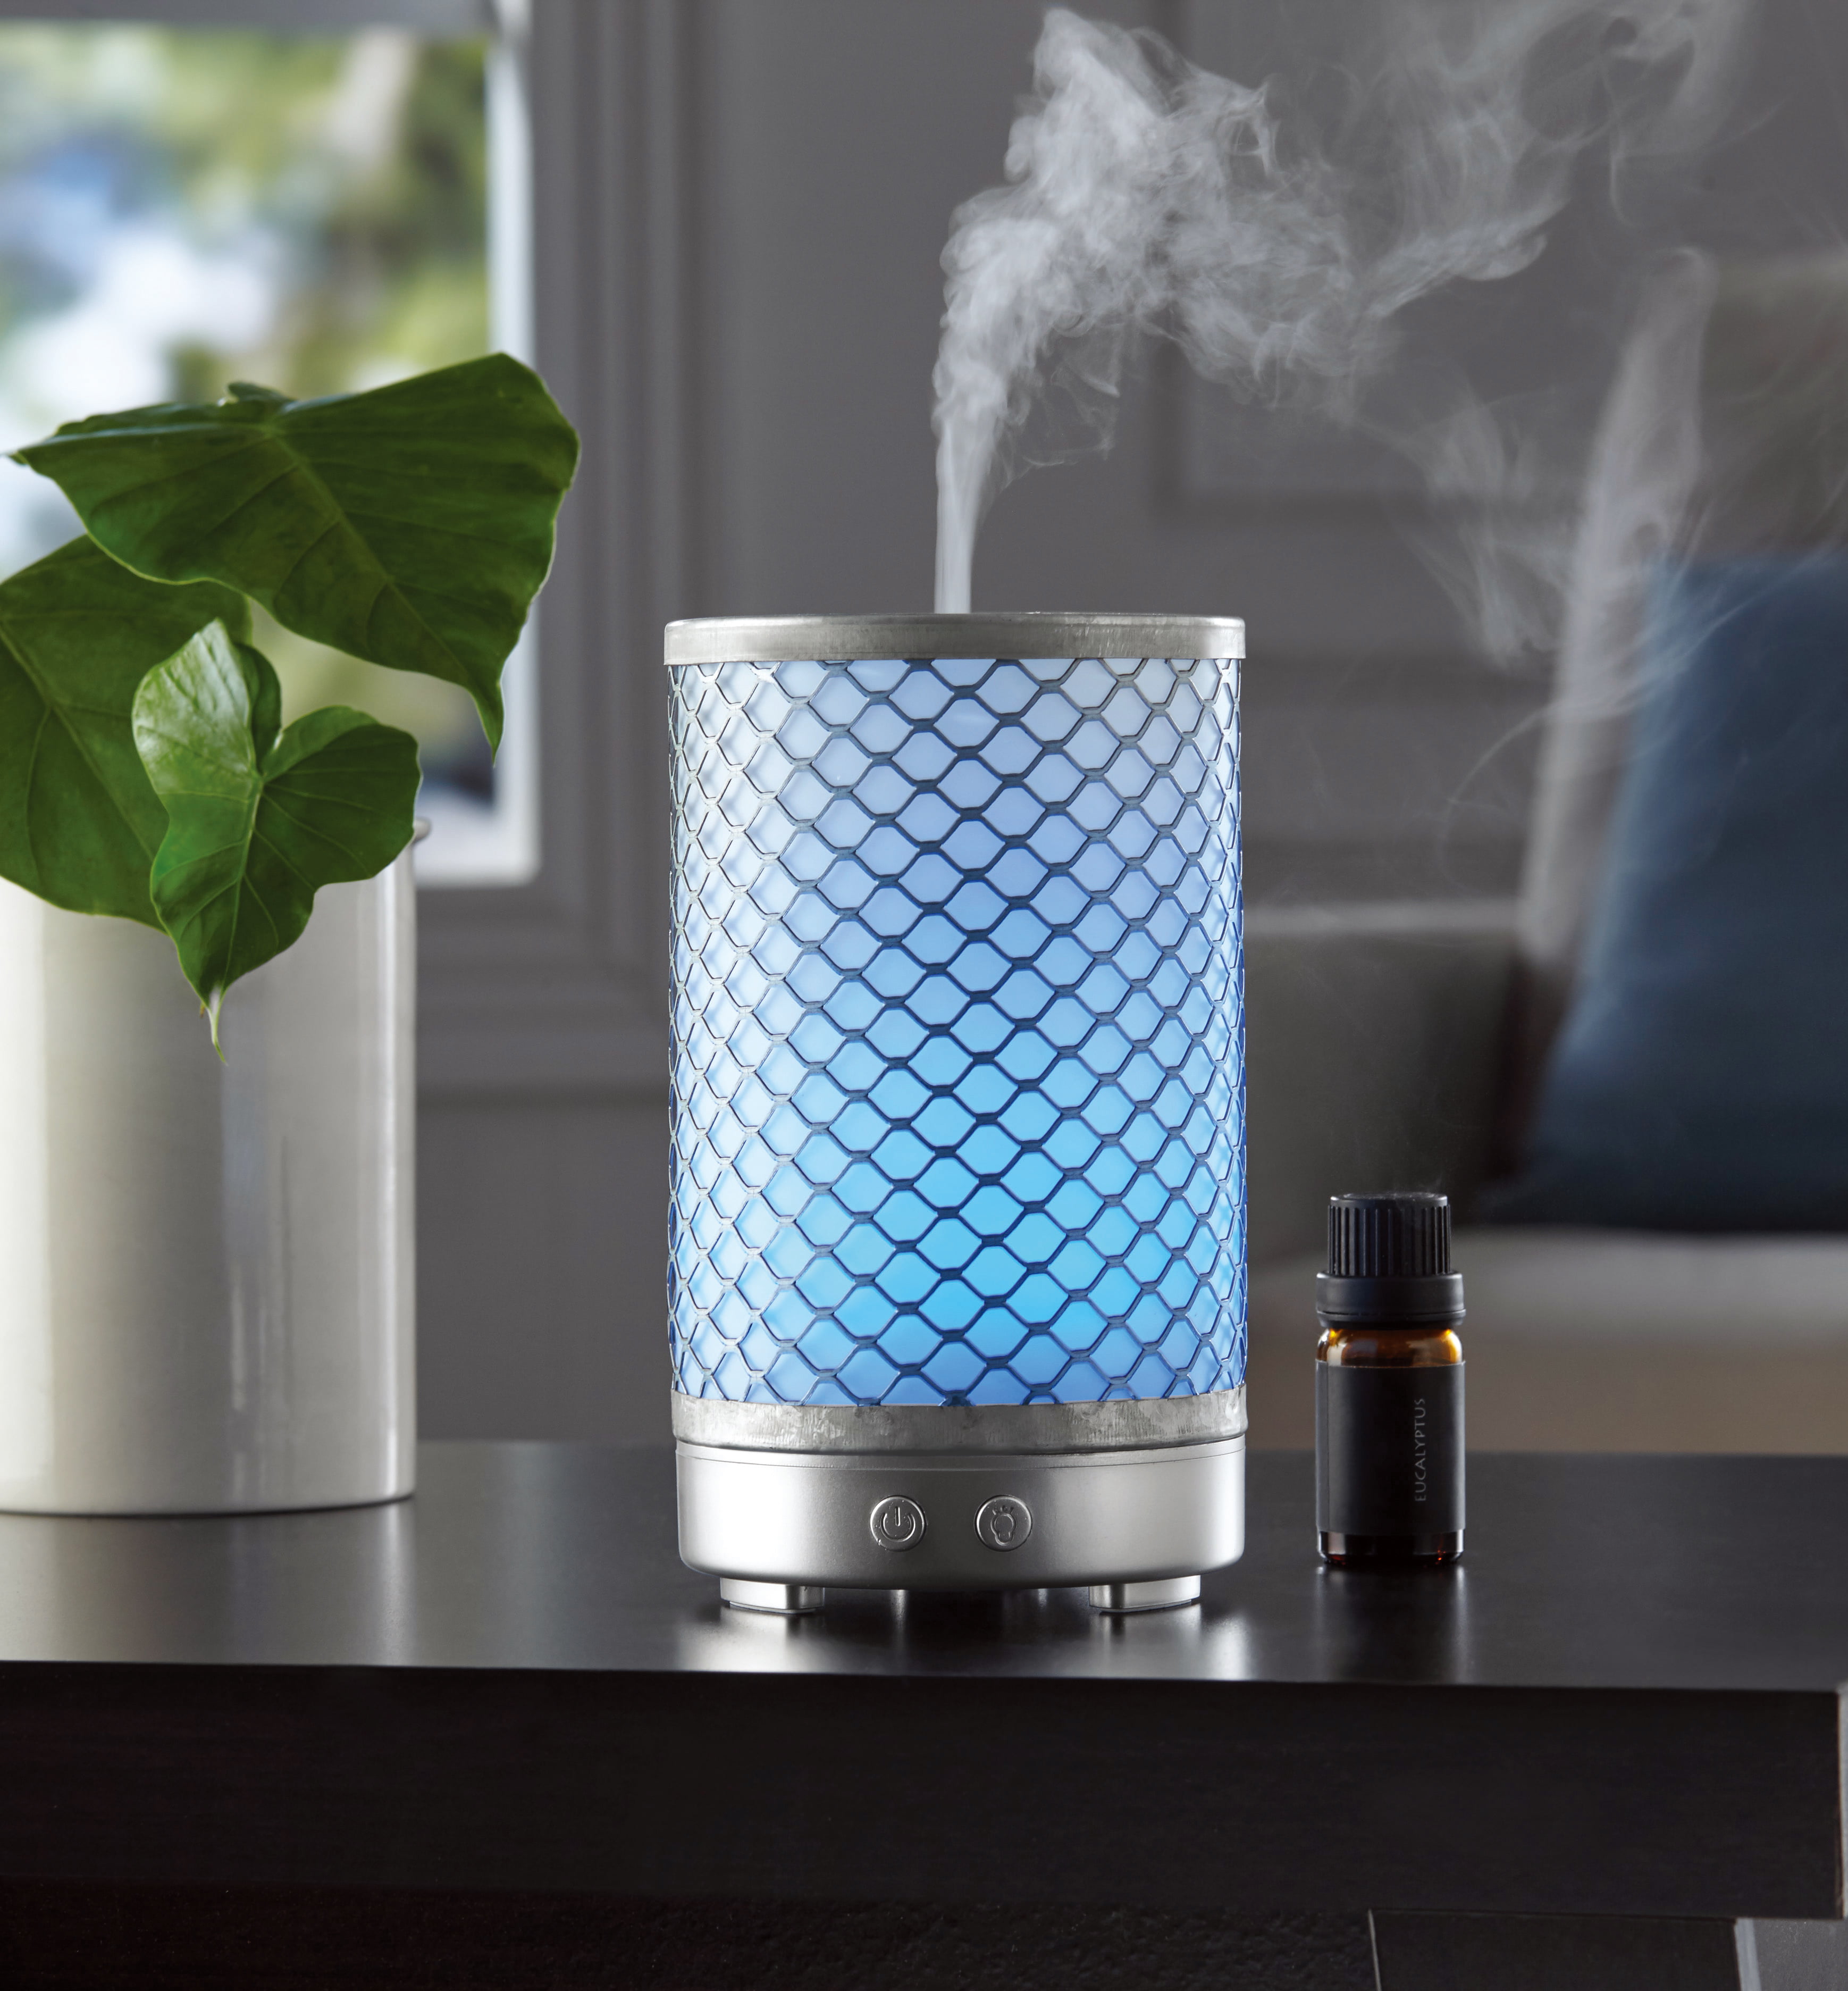 Mainstays Cool Mist Ultrasonic Aroma Diffuser, Chain Link